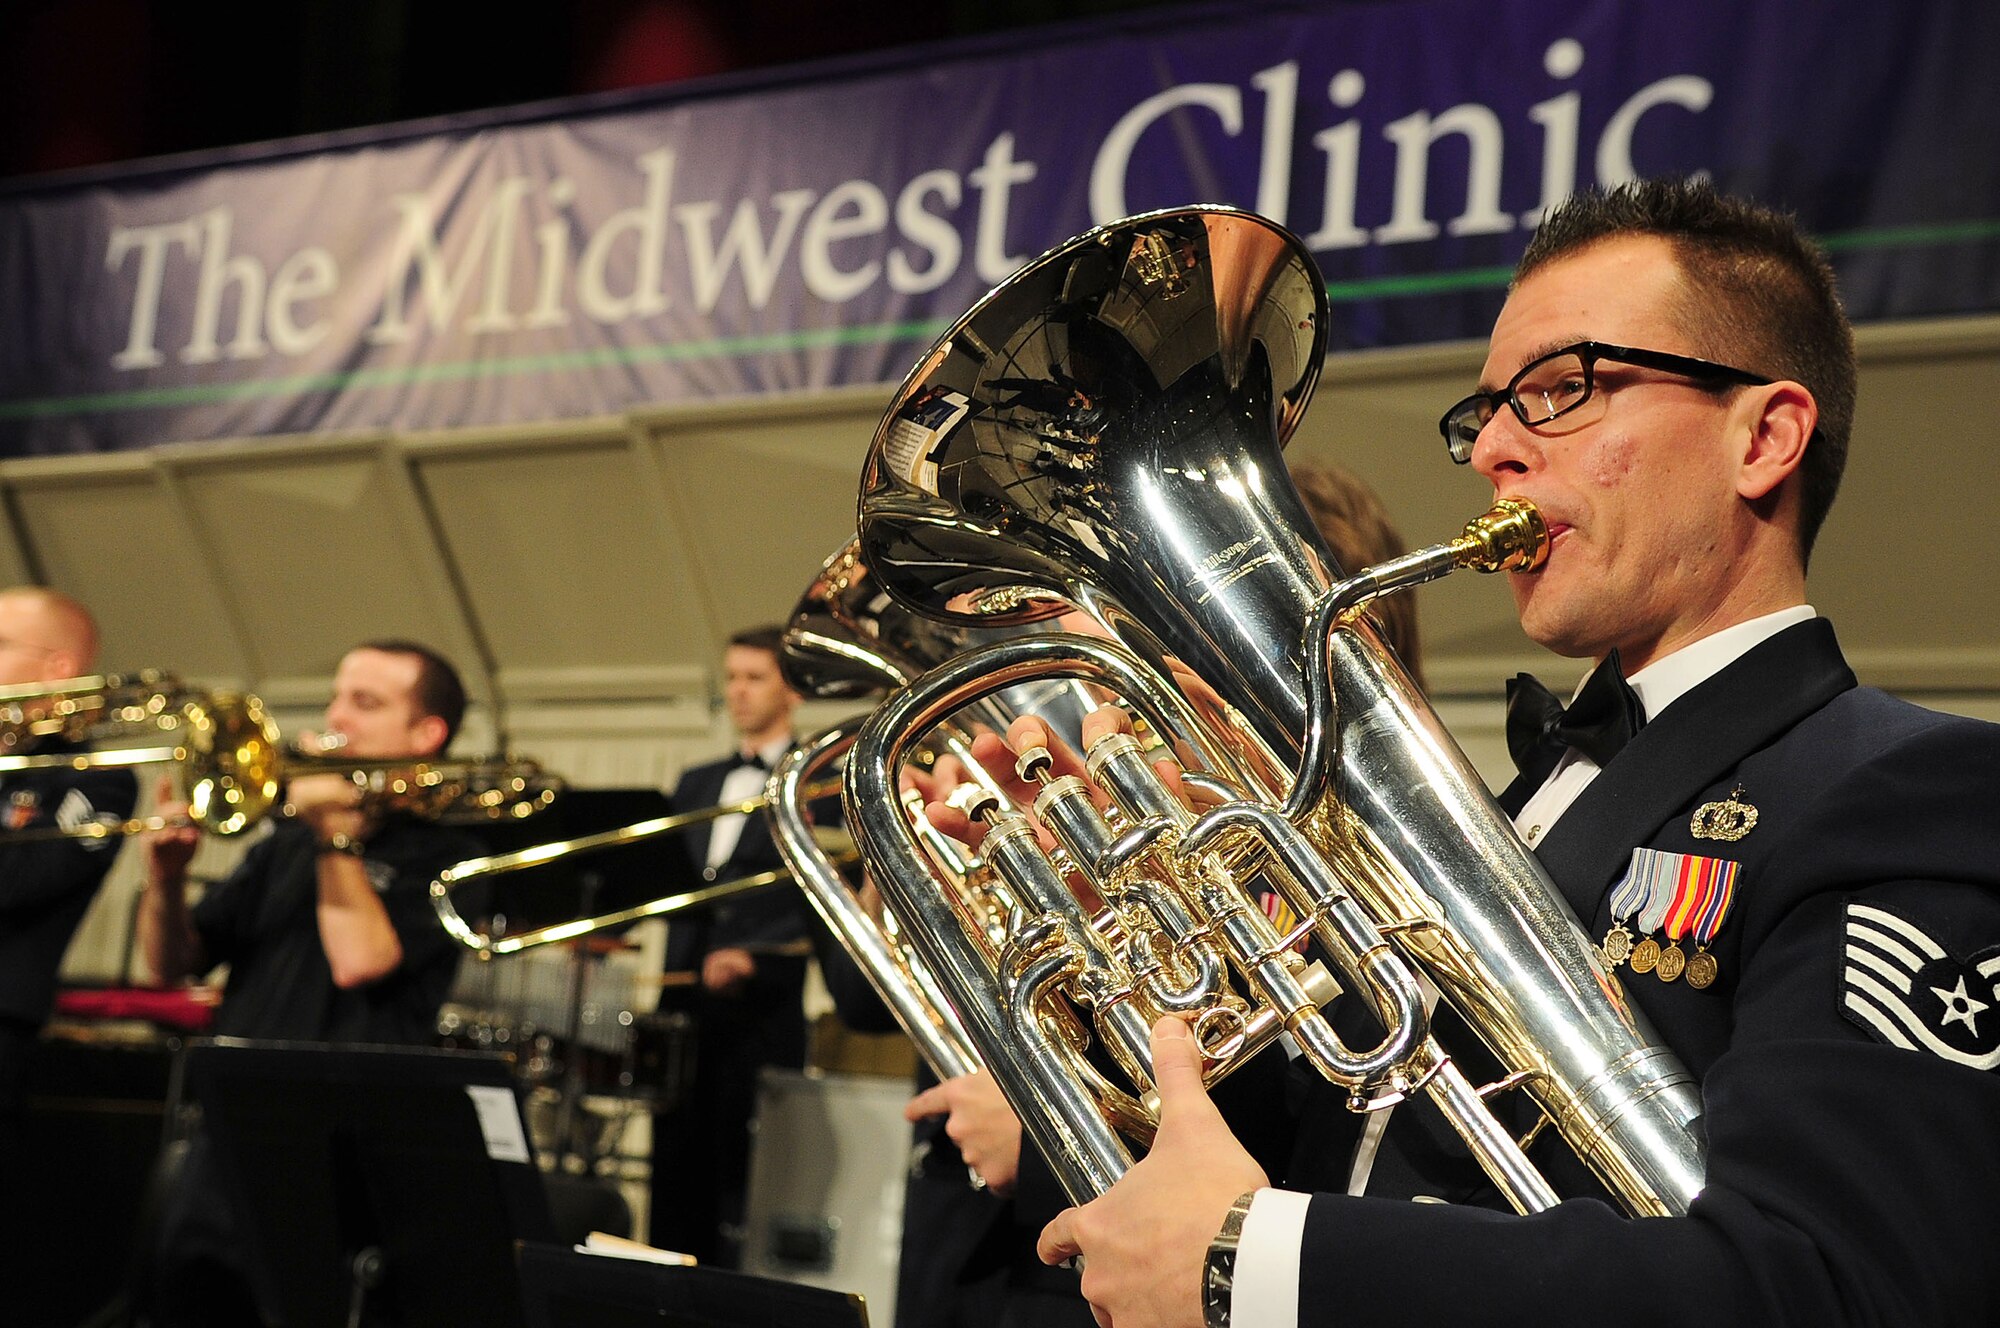 Tech. Sgt. Joseph Bello, U.S. Air Force Band euphonium player, performs alongside fellow Airmen musicians at the 66th Annual Midwest Clinic, Dec. 19, in Chicago, Ill. Every six years the USAF Band has the opportunity to perform at the clinic as they rotate the experience with fellow premier bands from each military branch stationed in Washington, D.C. (U.S. Air Force photo by Senior Airman Steele C. G. Britton)